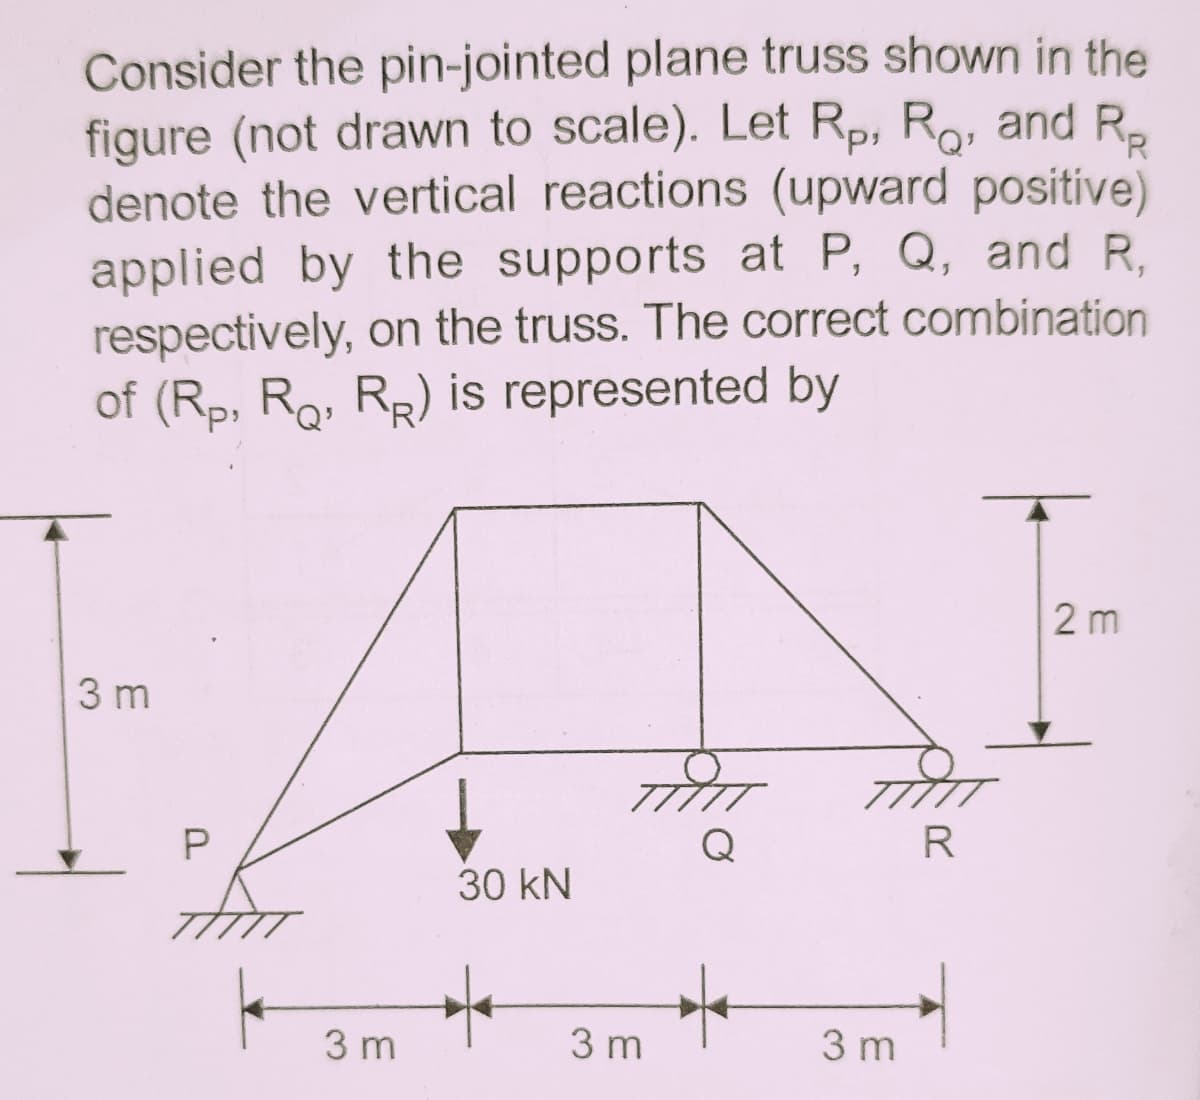 Consider the pin-jointed plane truss shown in the
figure (not drawn to scale). Let Rp, Ro, and R
denote the vertical reactions (upward positive)
applied by the supports at P, Q, and R,
respectively, on the truss. The correct combination
of (Rp, Ro, RR) is represented by
2 m
3 m
TIÌTT
7TTTT
Q
30 kN
3 m
3 m
3 m
P.
